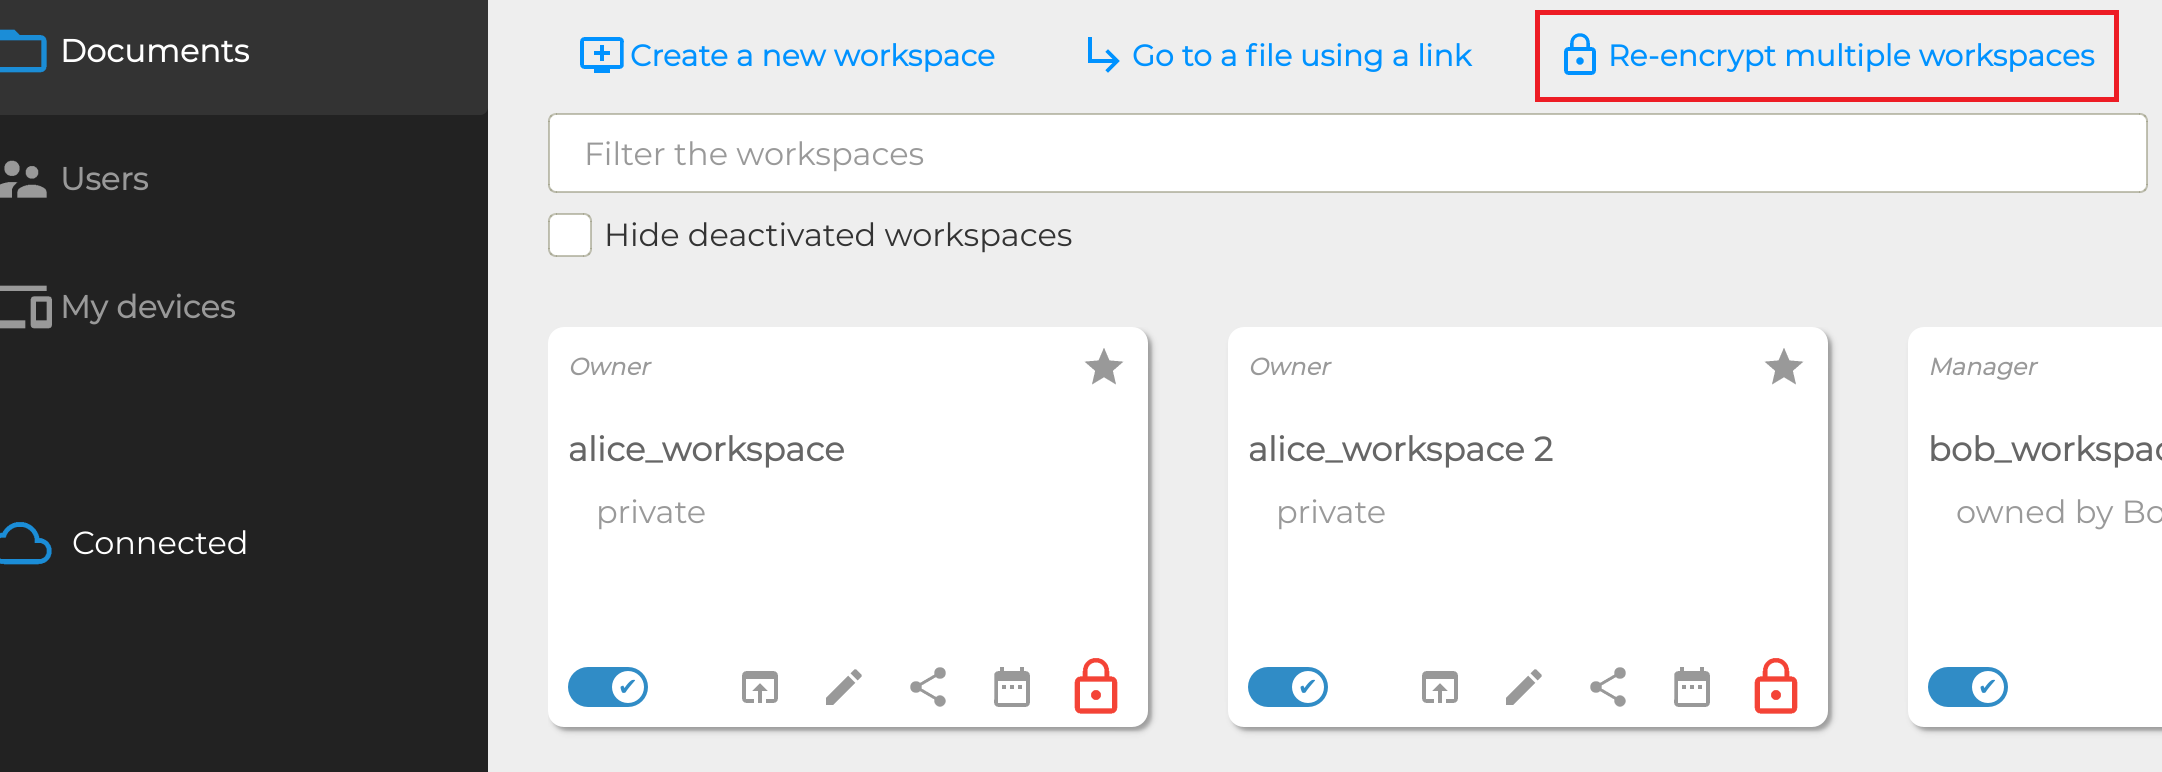 Re-encrypt multiple workspaces at once